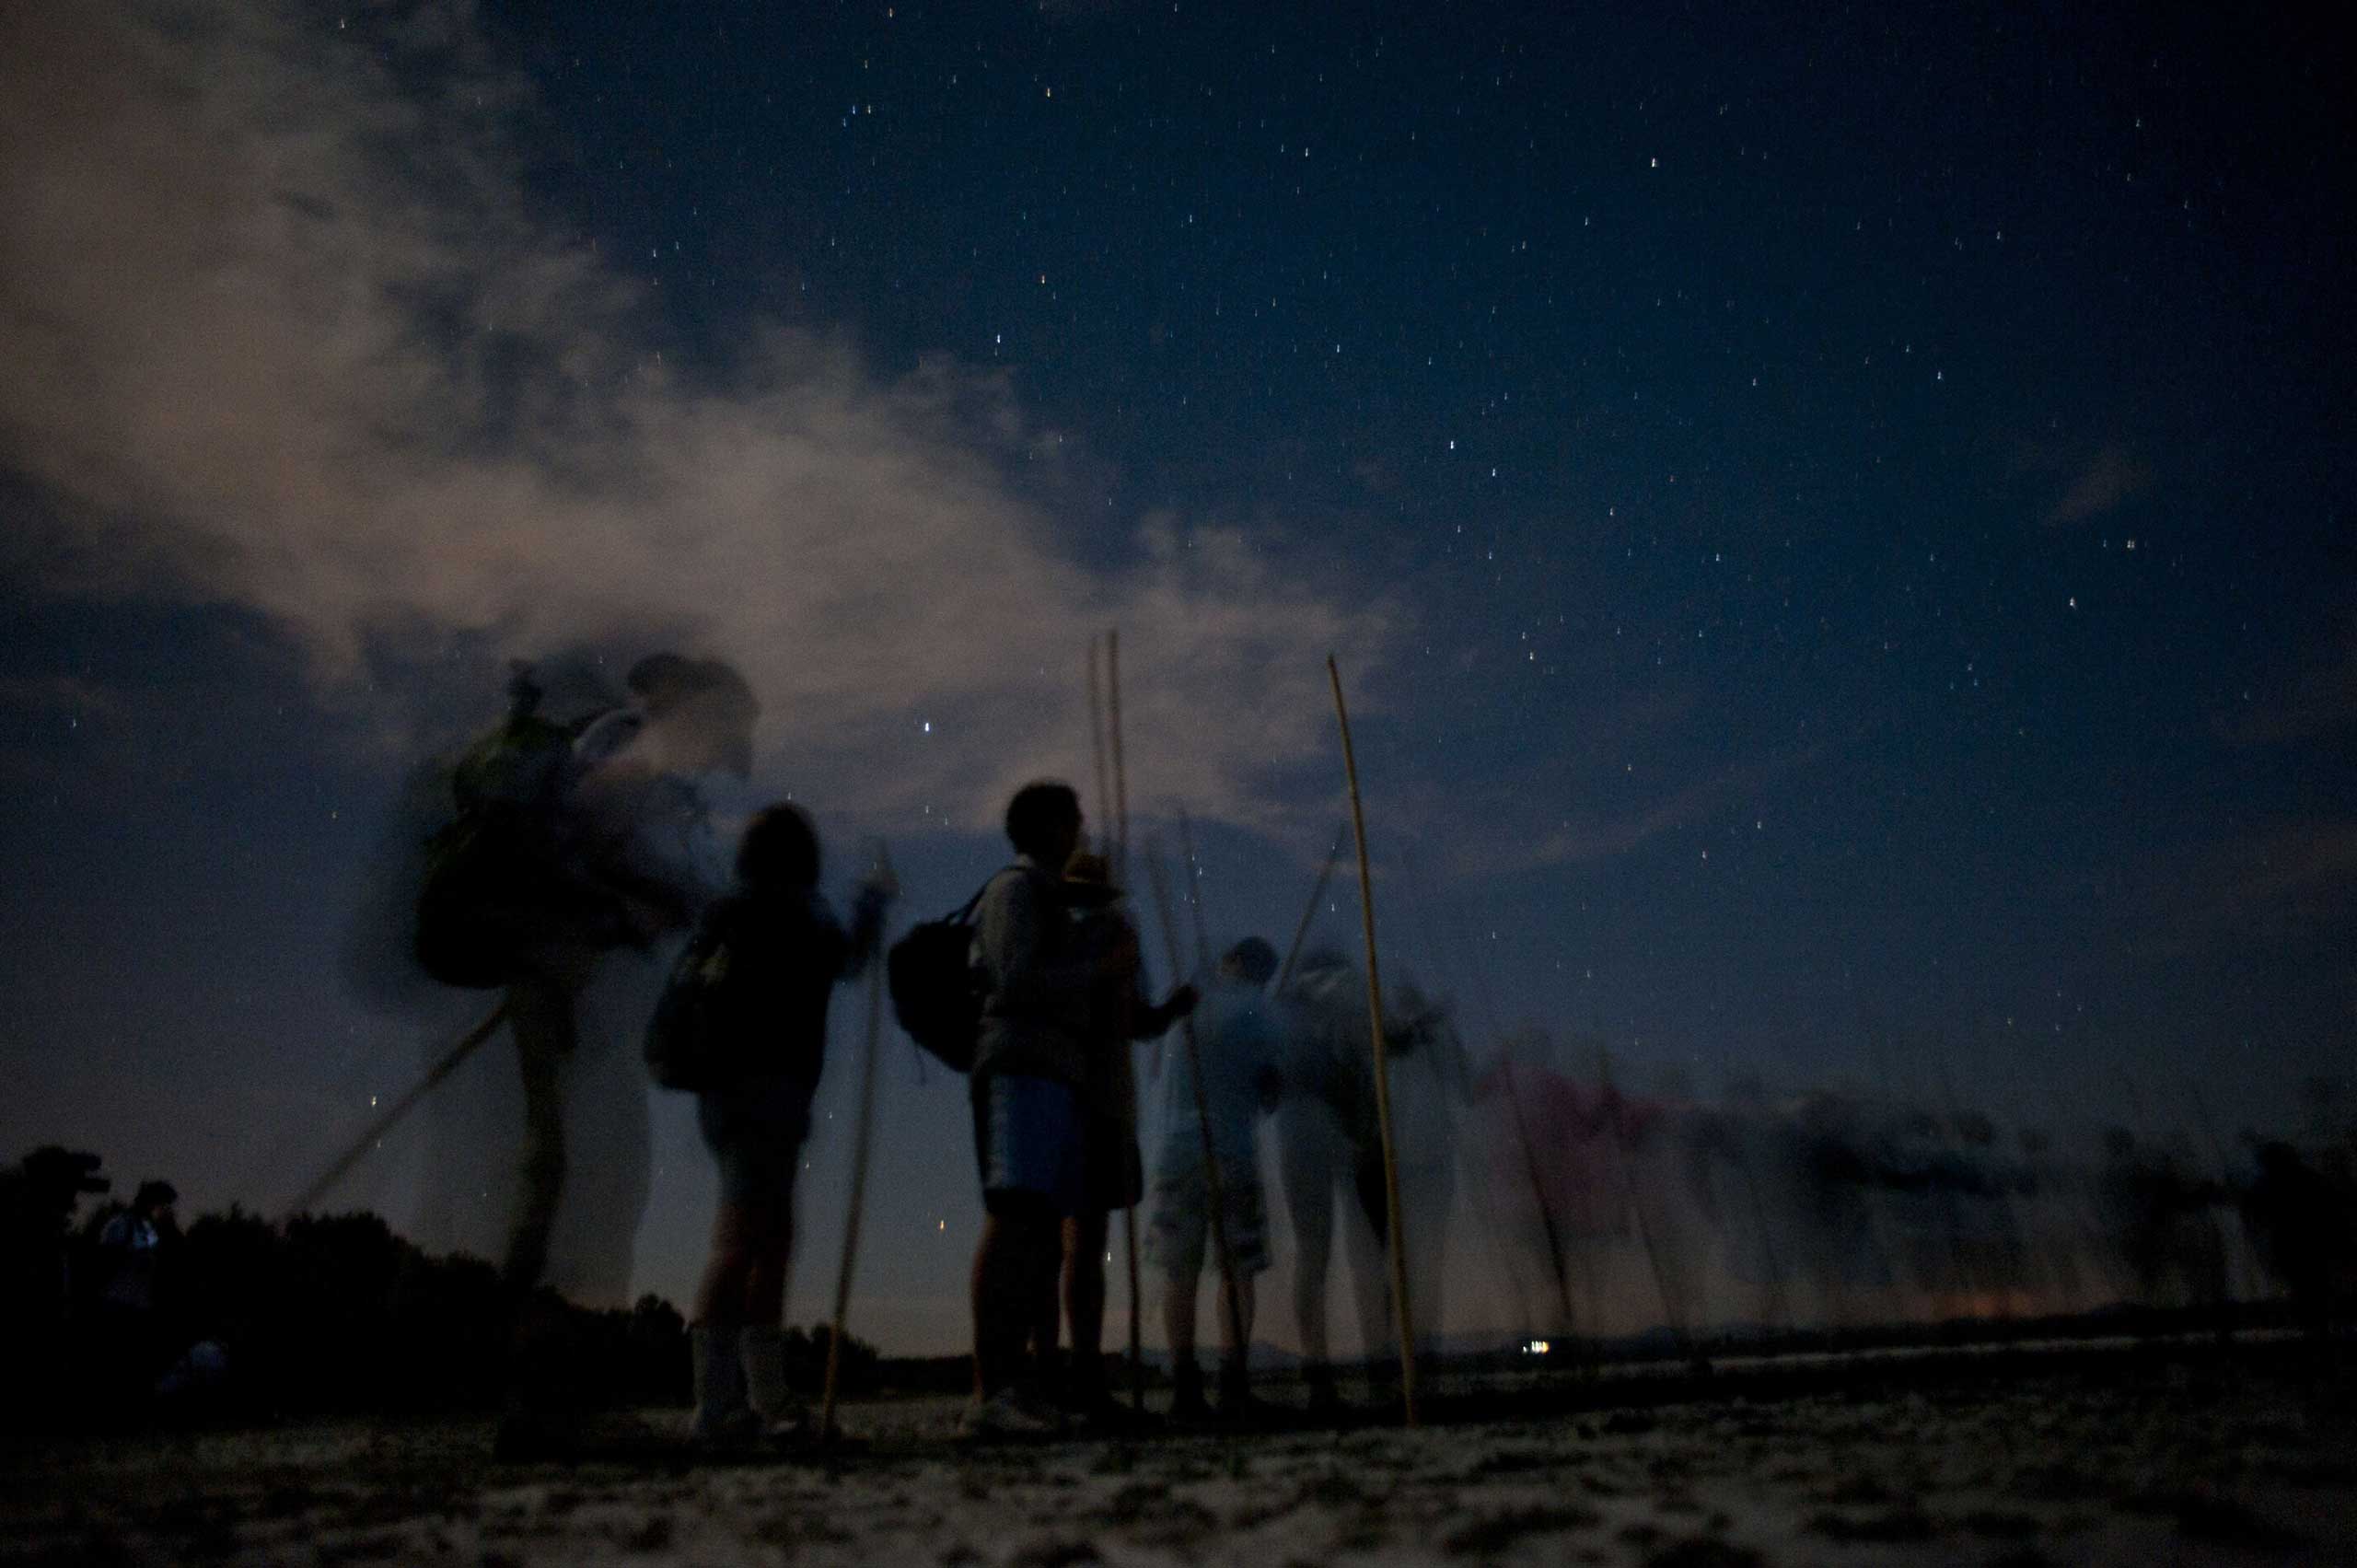 Volunteers walk in the Fuente de Piedra lake, 70 kilometres from Malaga, on July 19, 2014, during a tagging and control operation of flamingo chicks to monitor the evolution of the species.